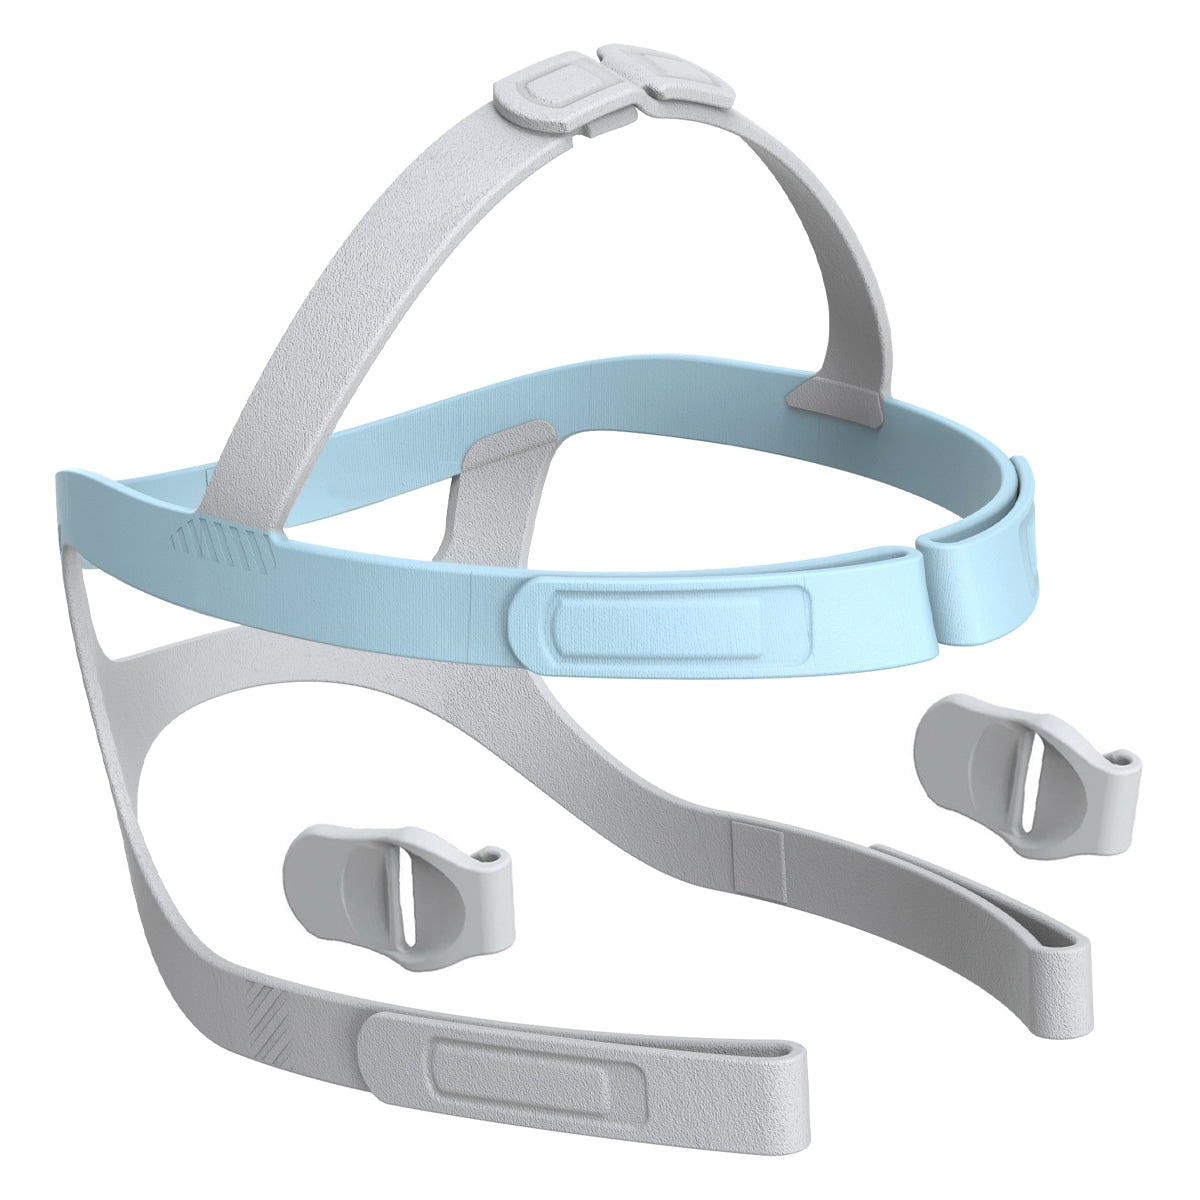 Headgear with Clips for Eson 2 CPAP/BiPAP Masks